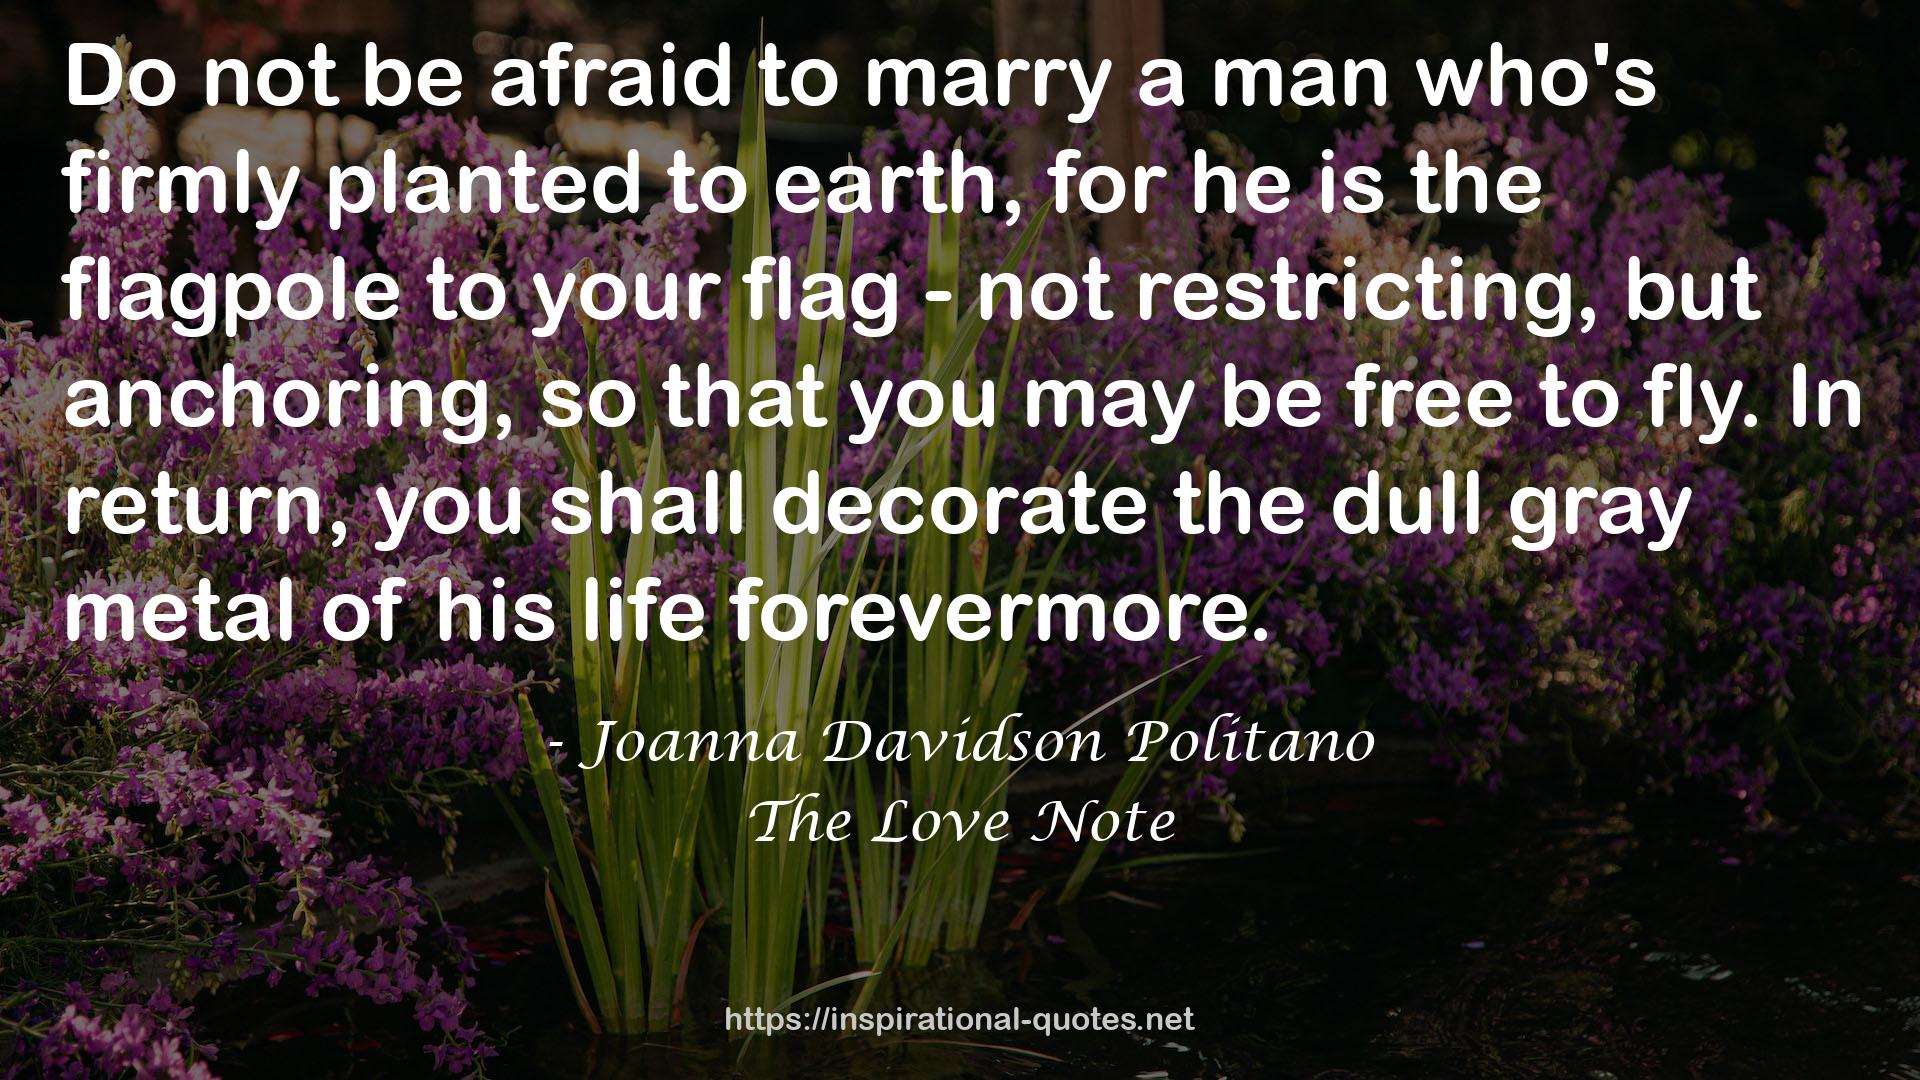 The Love Note QUOTES